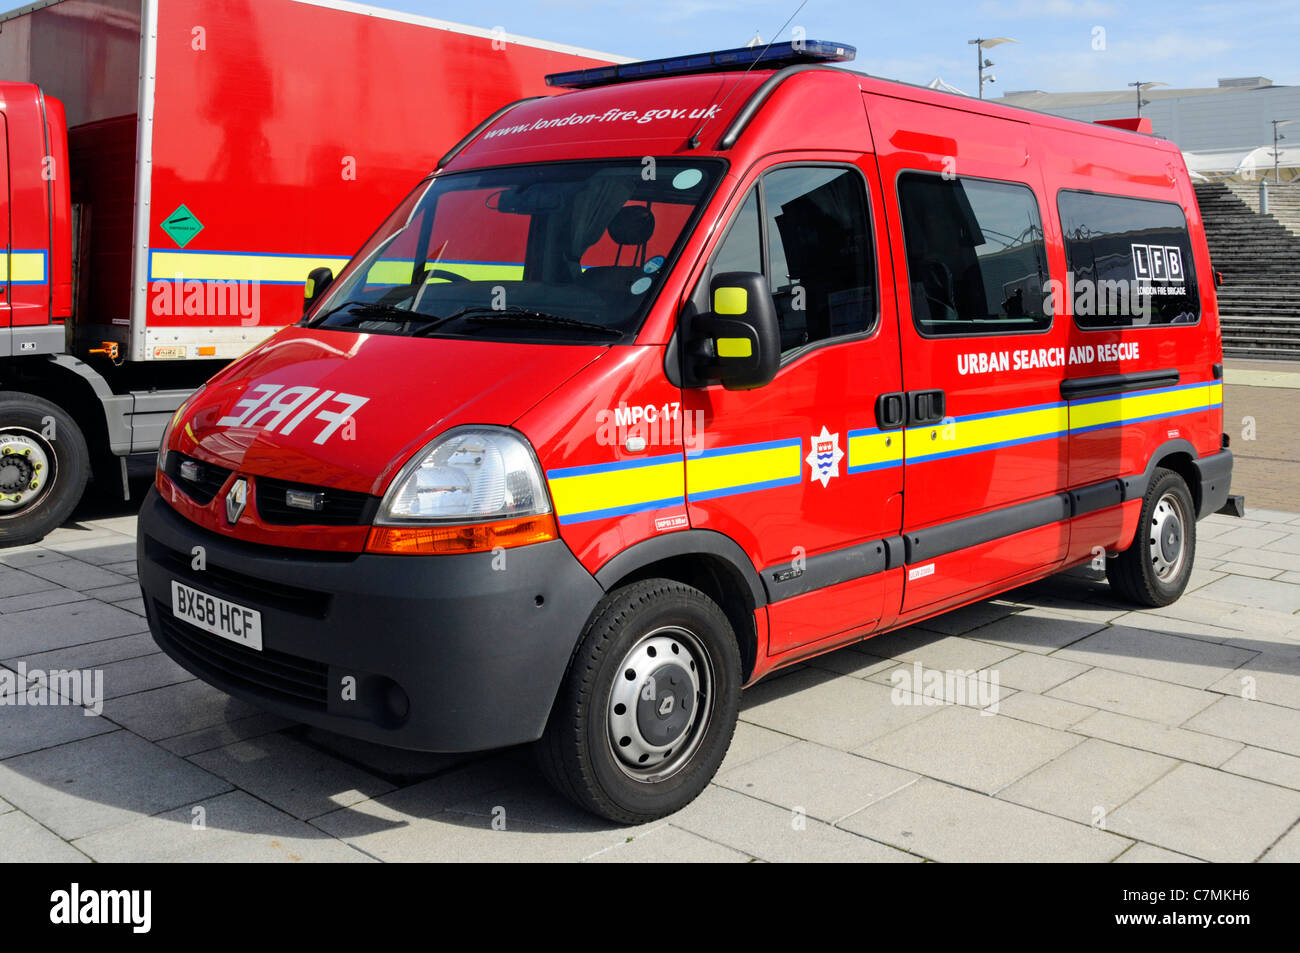 London Fire Brigade Urban Search and Rescue emergency services vehicle to transport specialist teams to people trapped situations London England UK Stock Photo